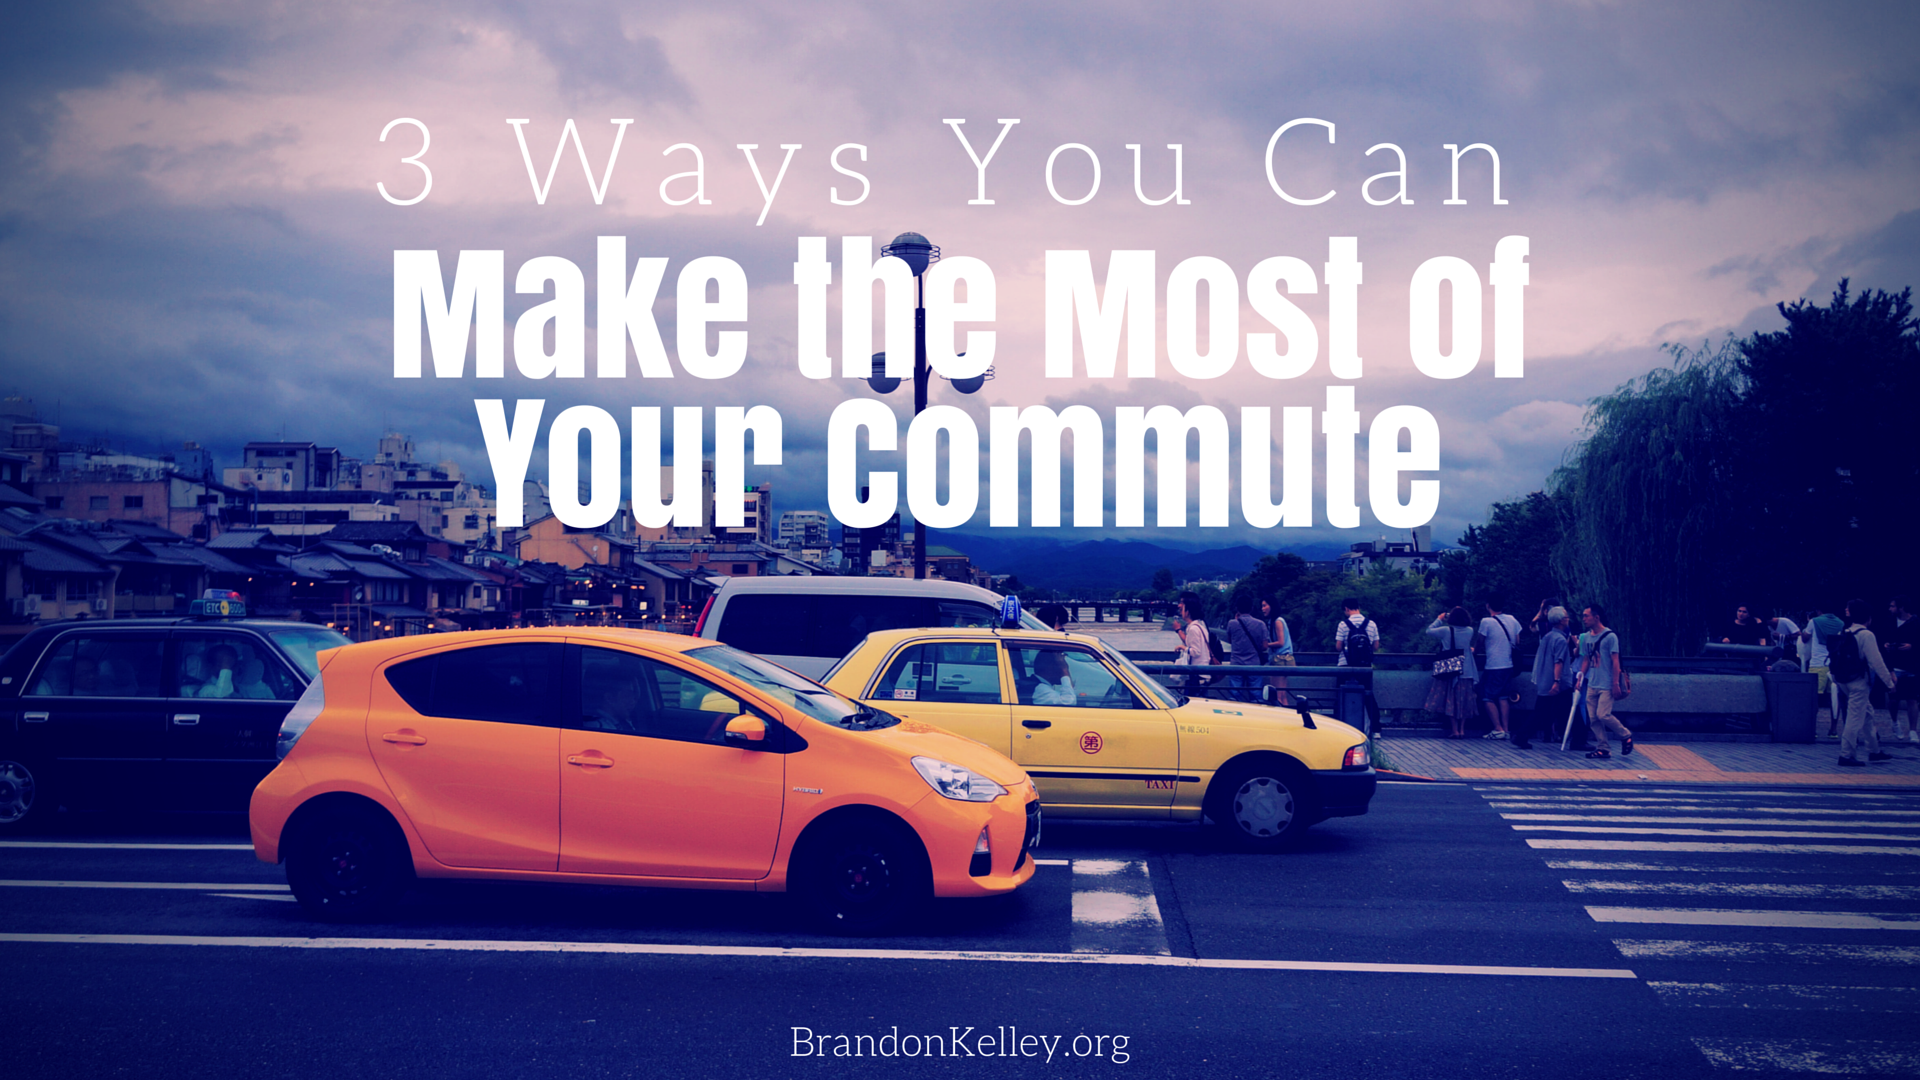 3 Ways You Can Make The Most of Your Commute